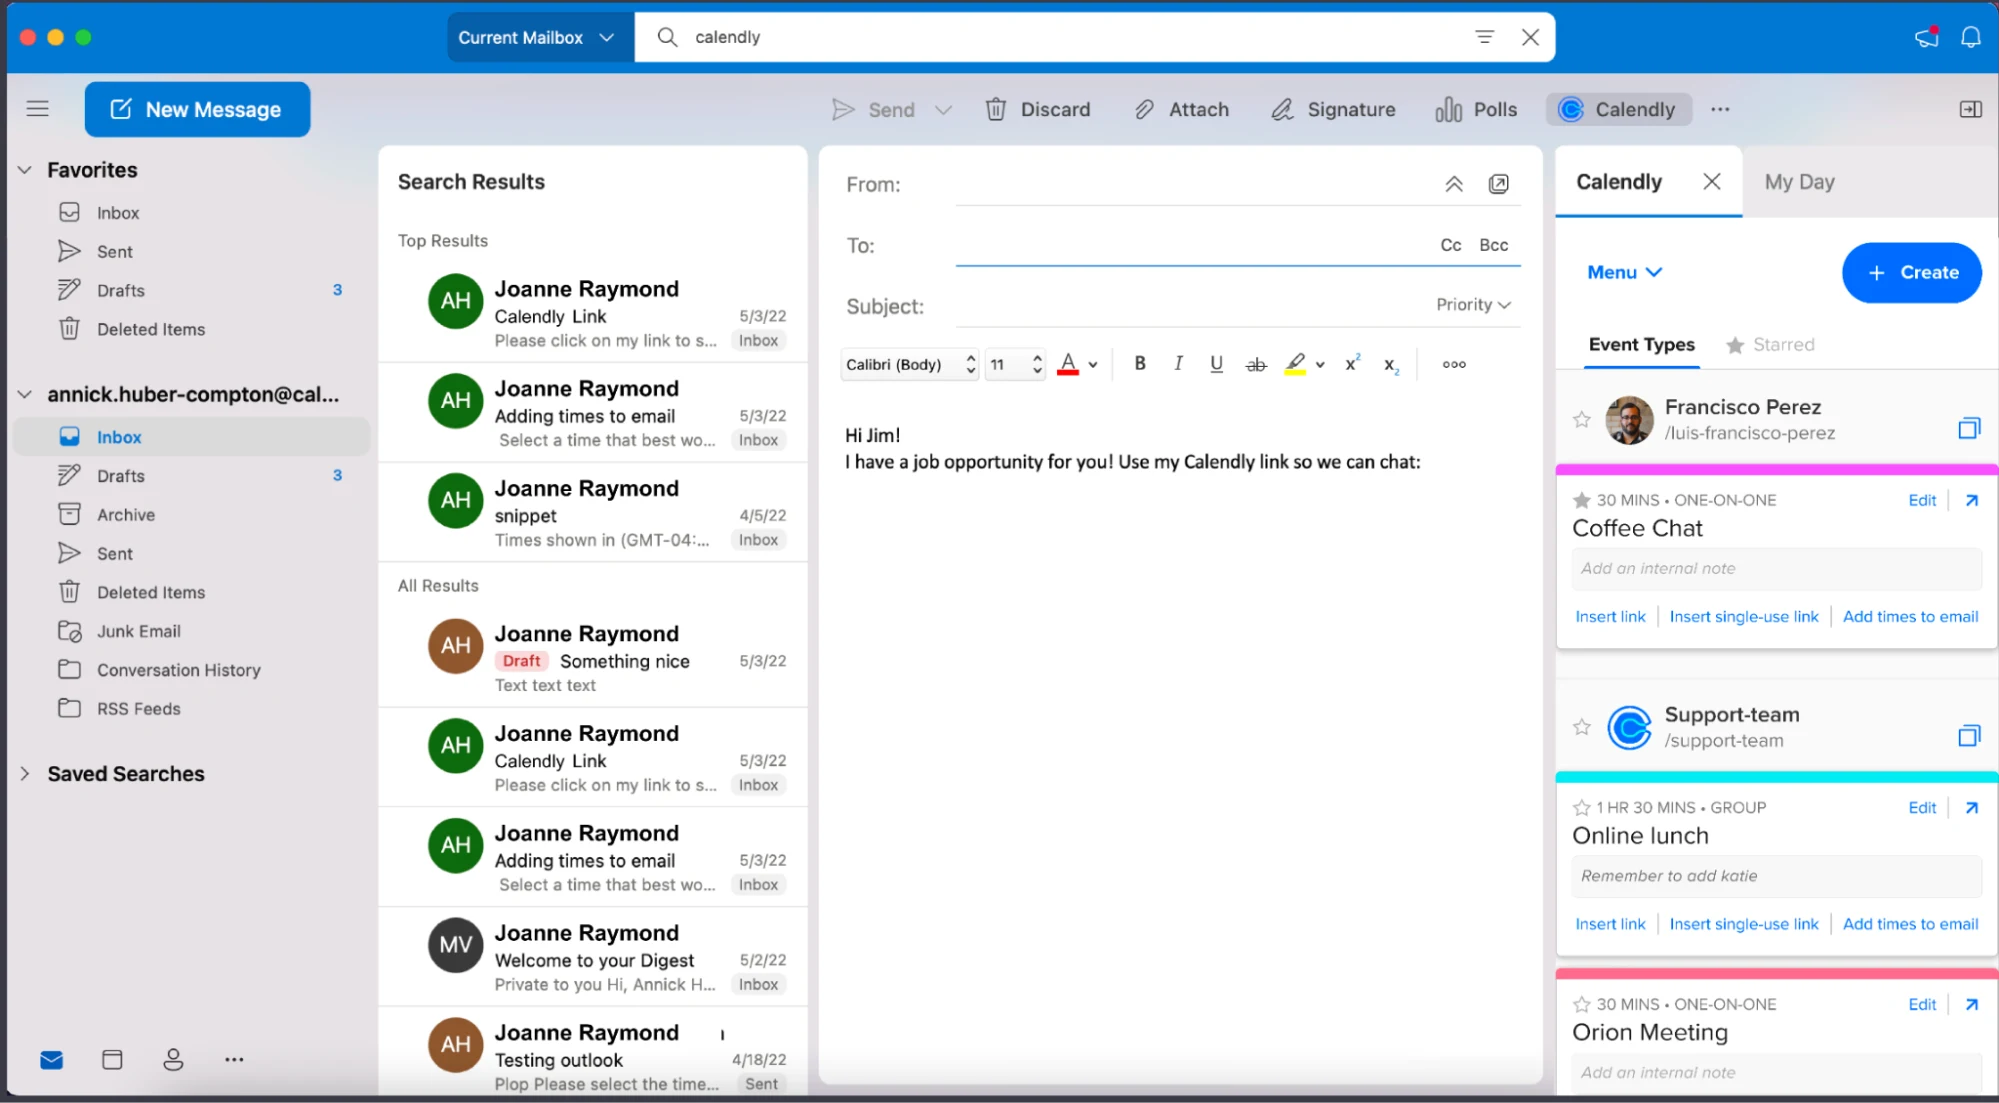 Screenshot of an Outlook inbox with the Calendly add-in panel open showing several Event Types, including the option to "Add times to email".